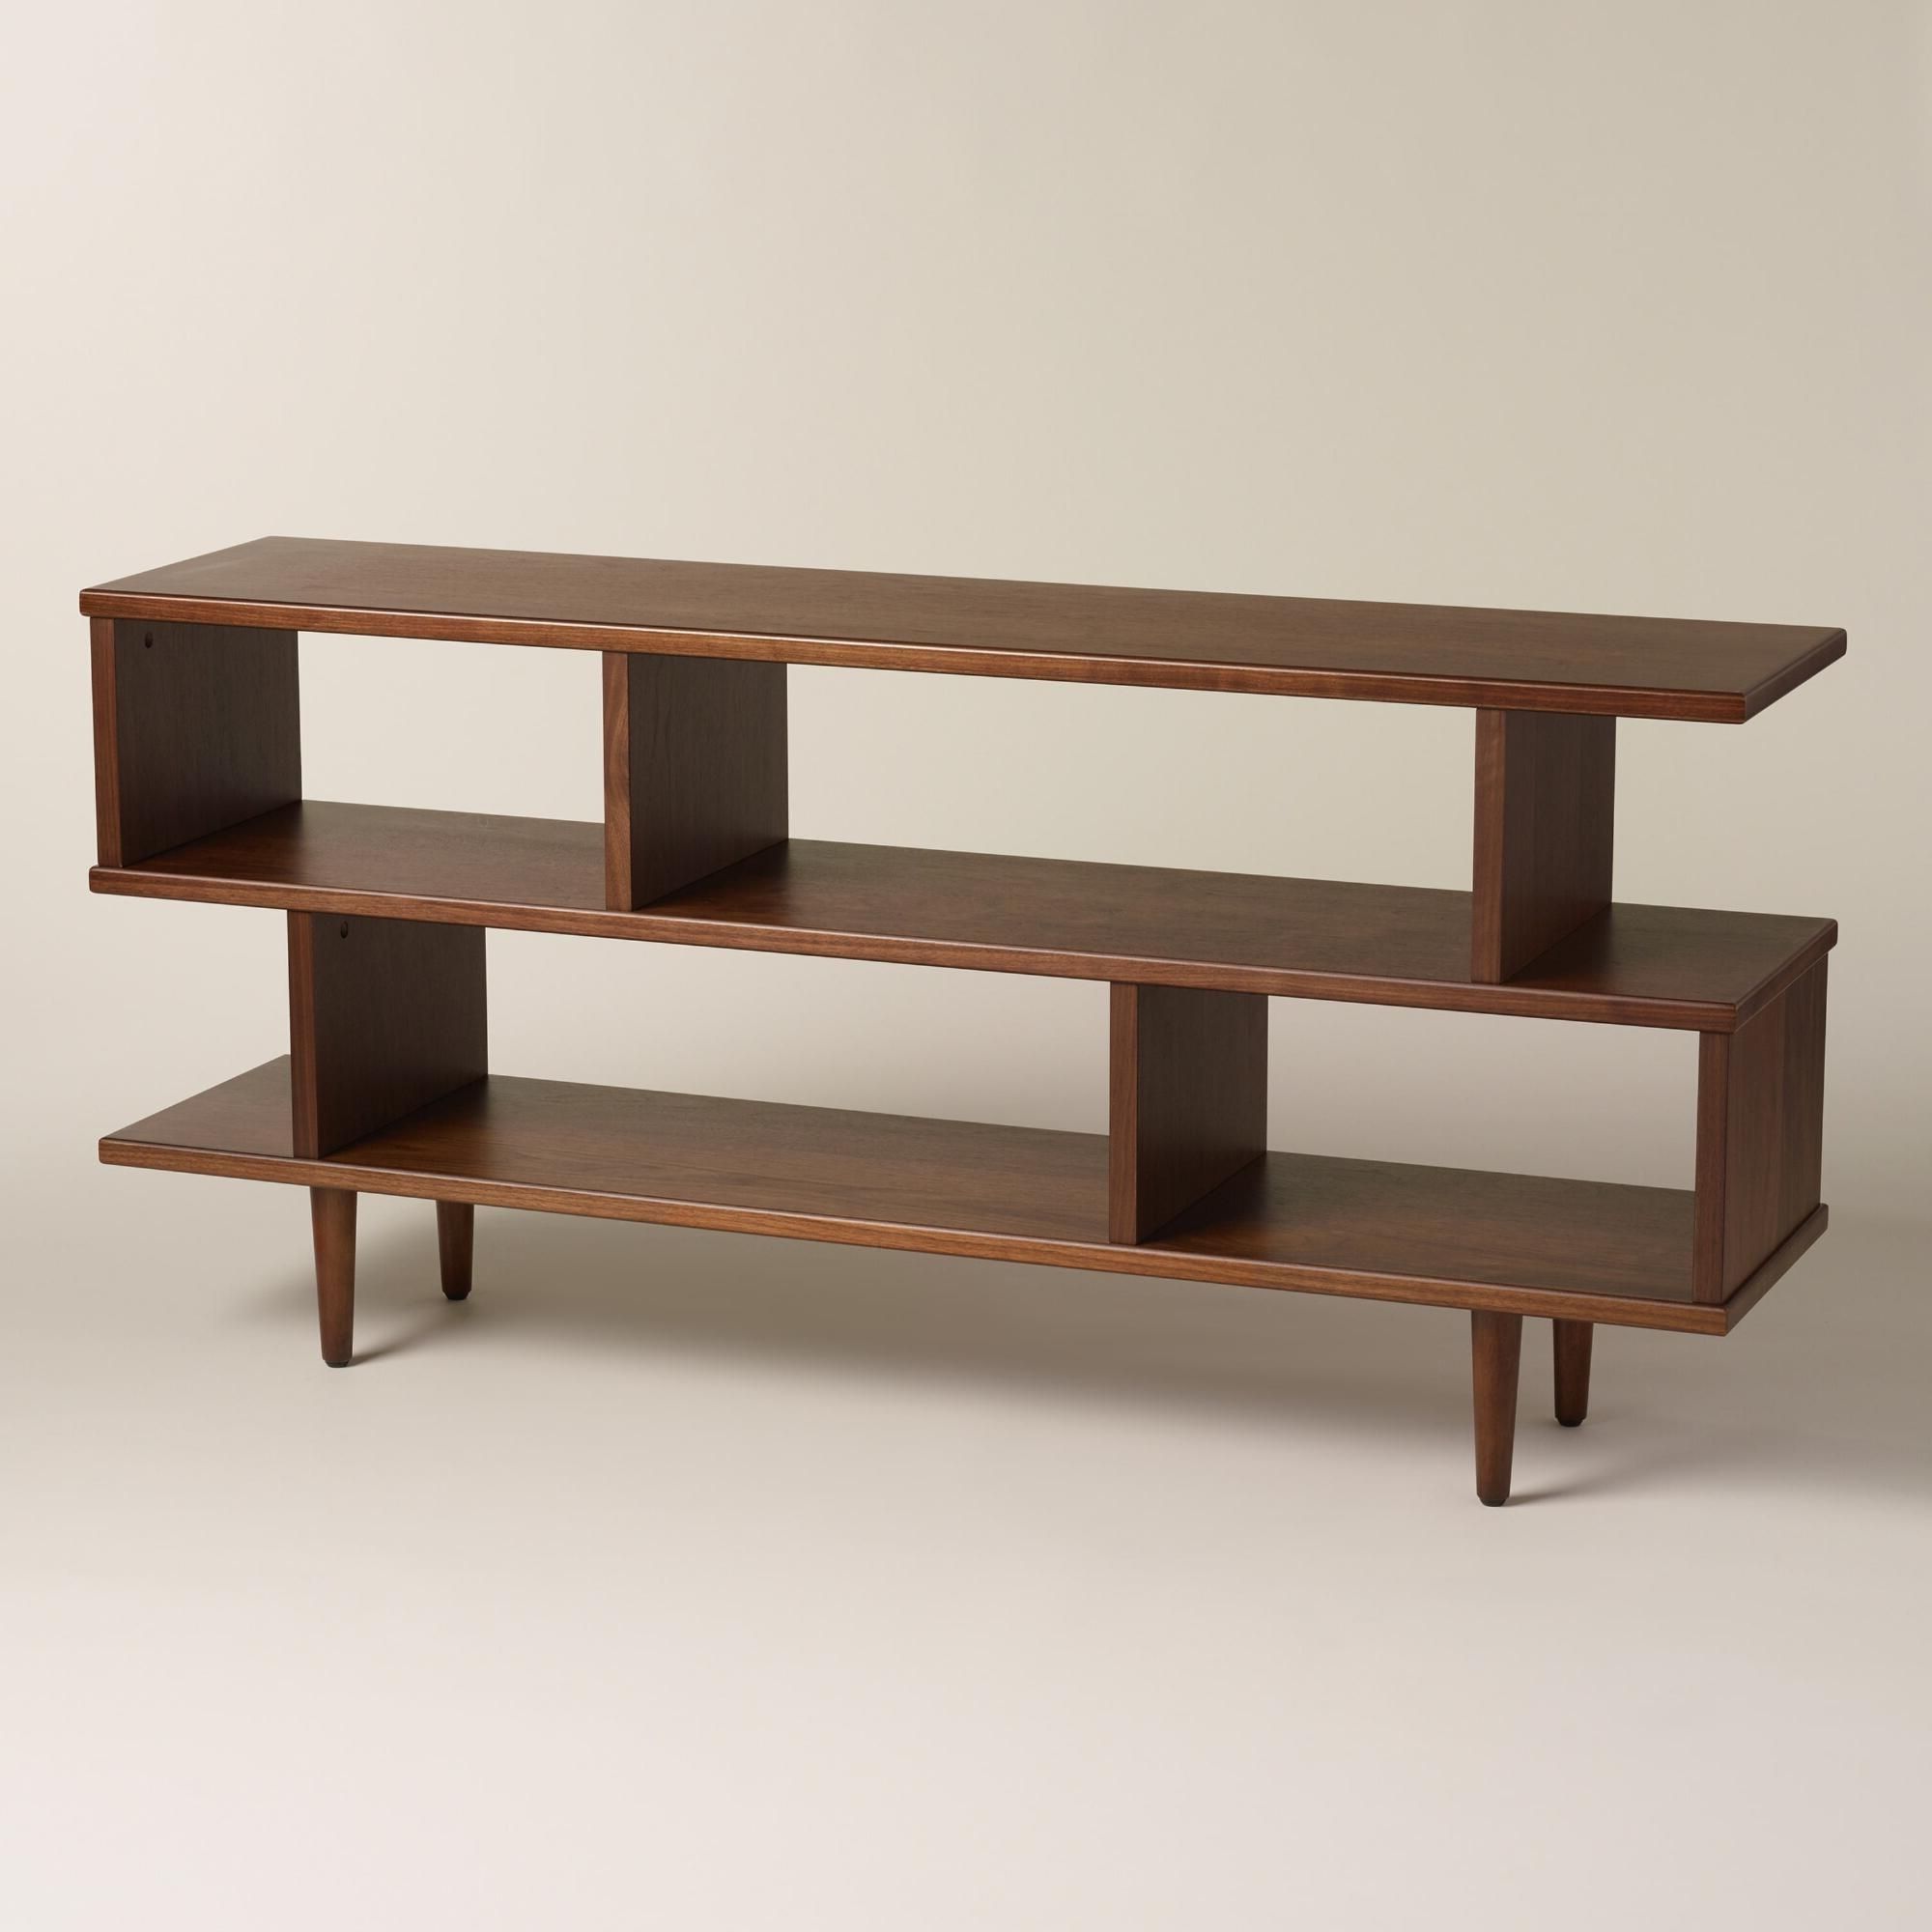 2018 World Market Bookcases For Featuring Six Roomy Compartments, Our Bookcase Offers Ample (View 13 of 15)